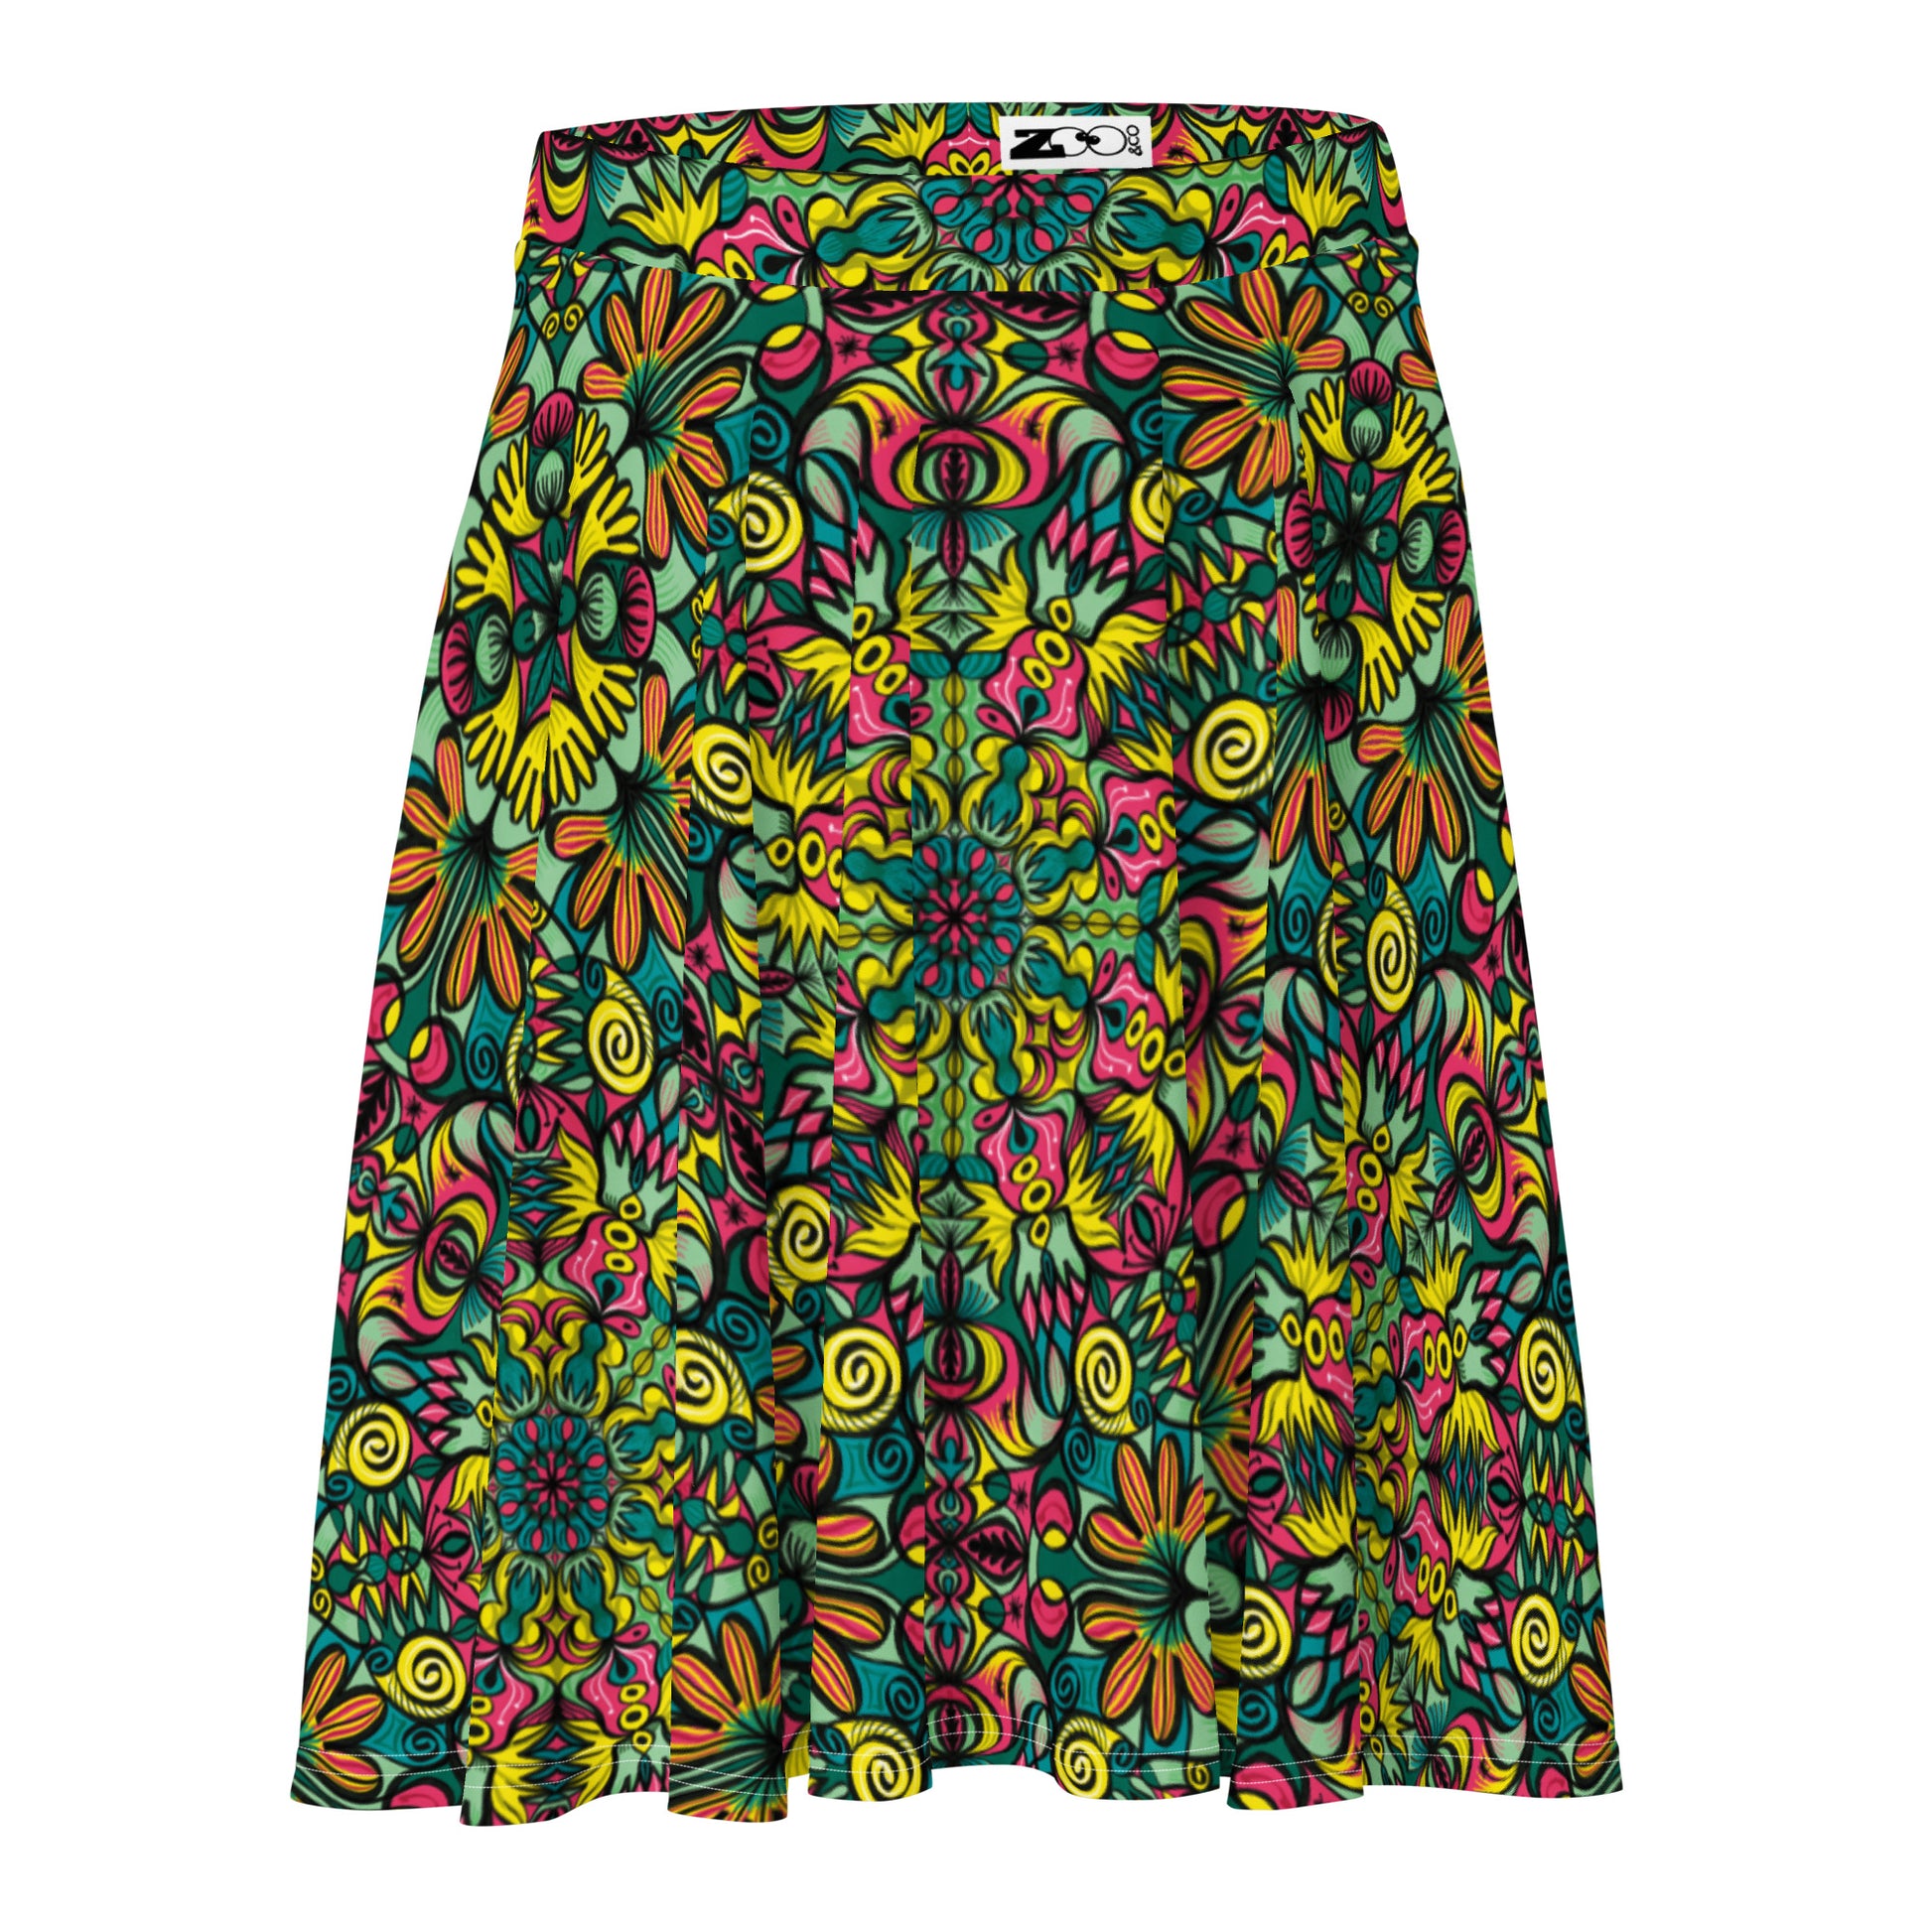 Exploring Jungle Oddities: Inspiration from the Fascinating Wildflowers of the Tropics - Skater Skirt. Product detail. Front view